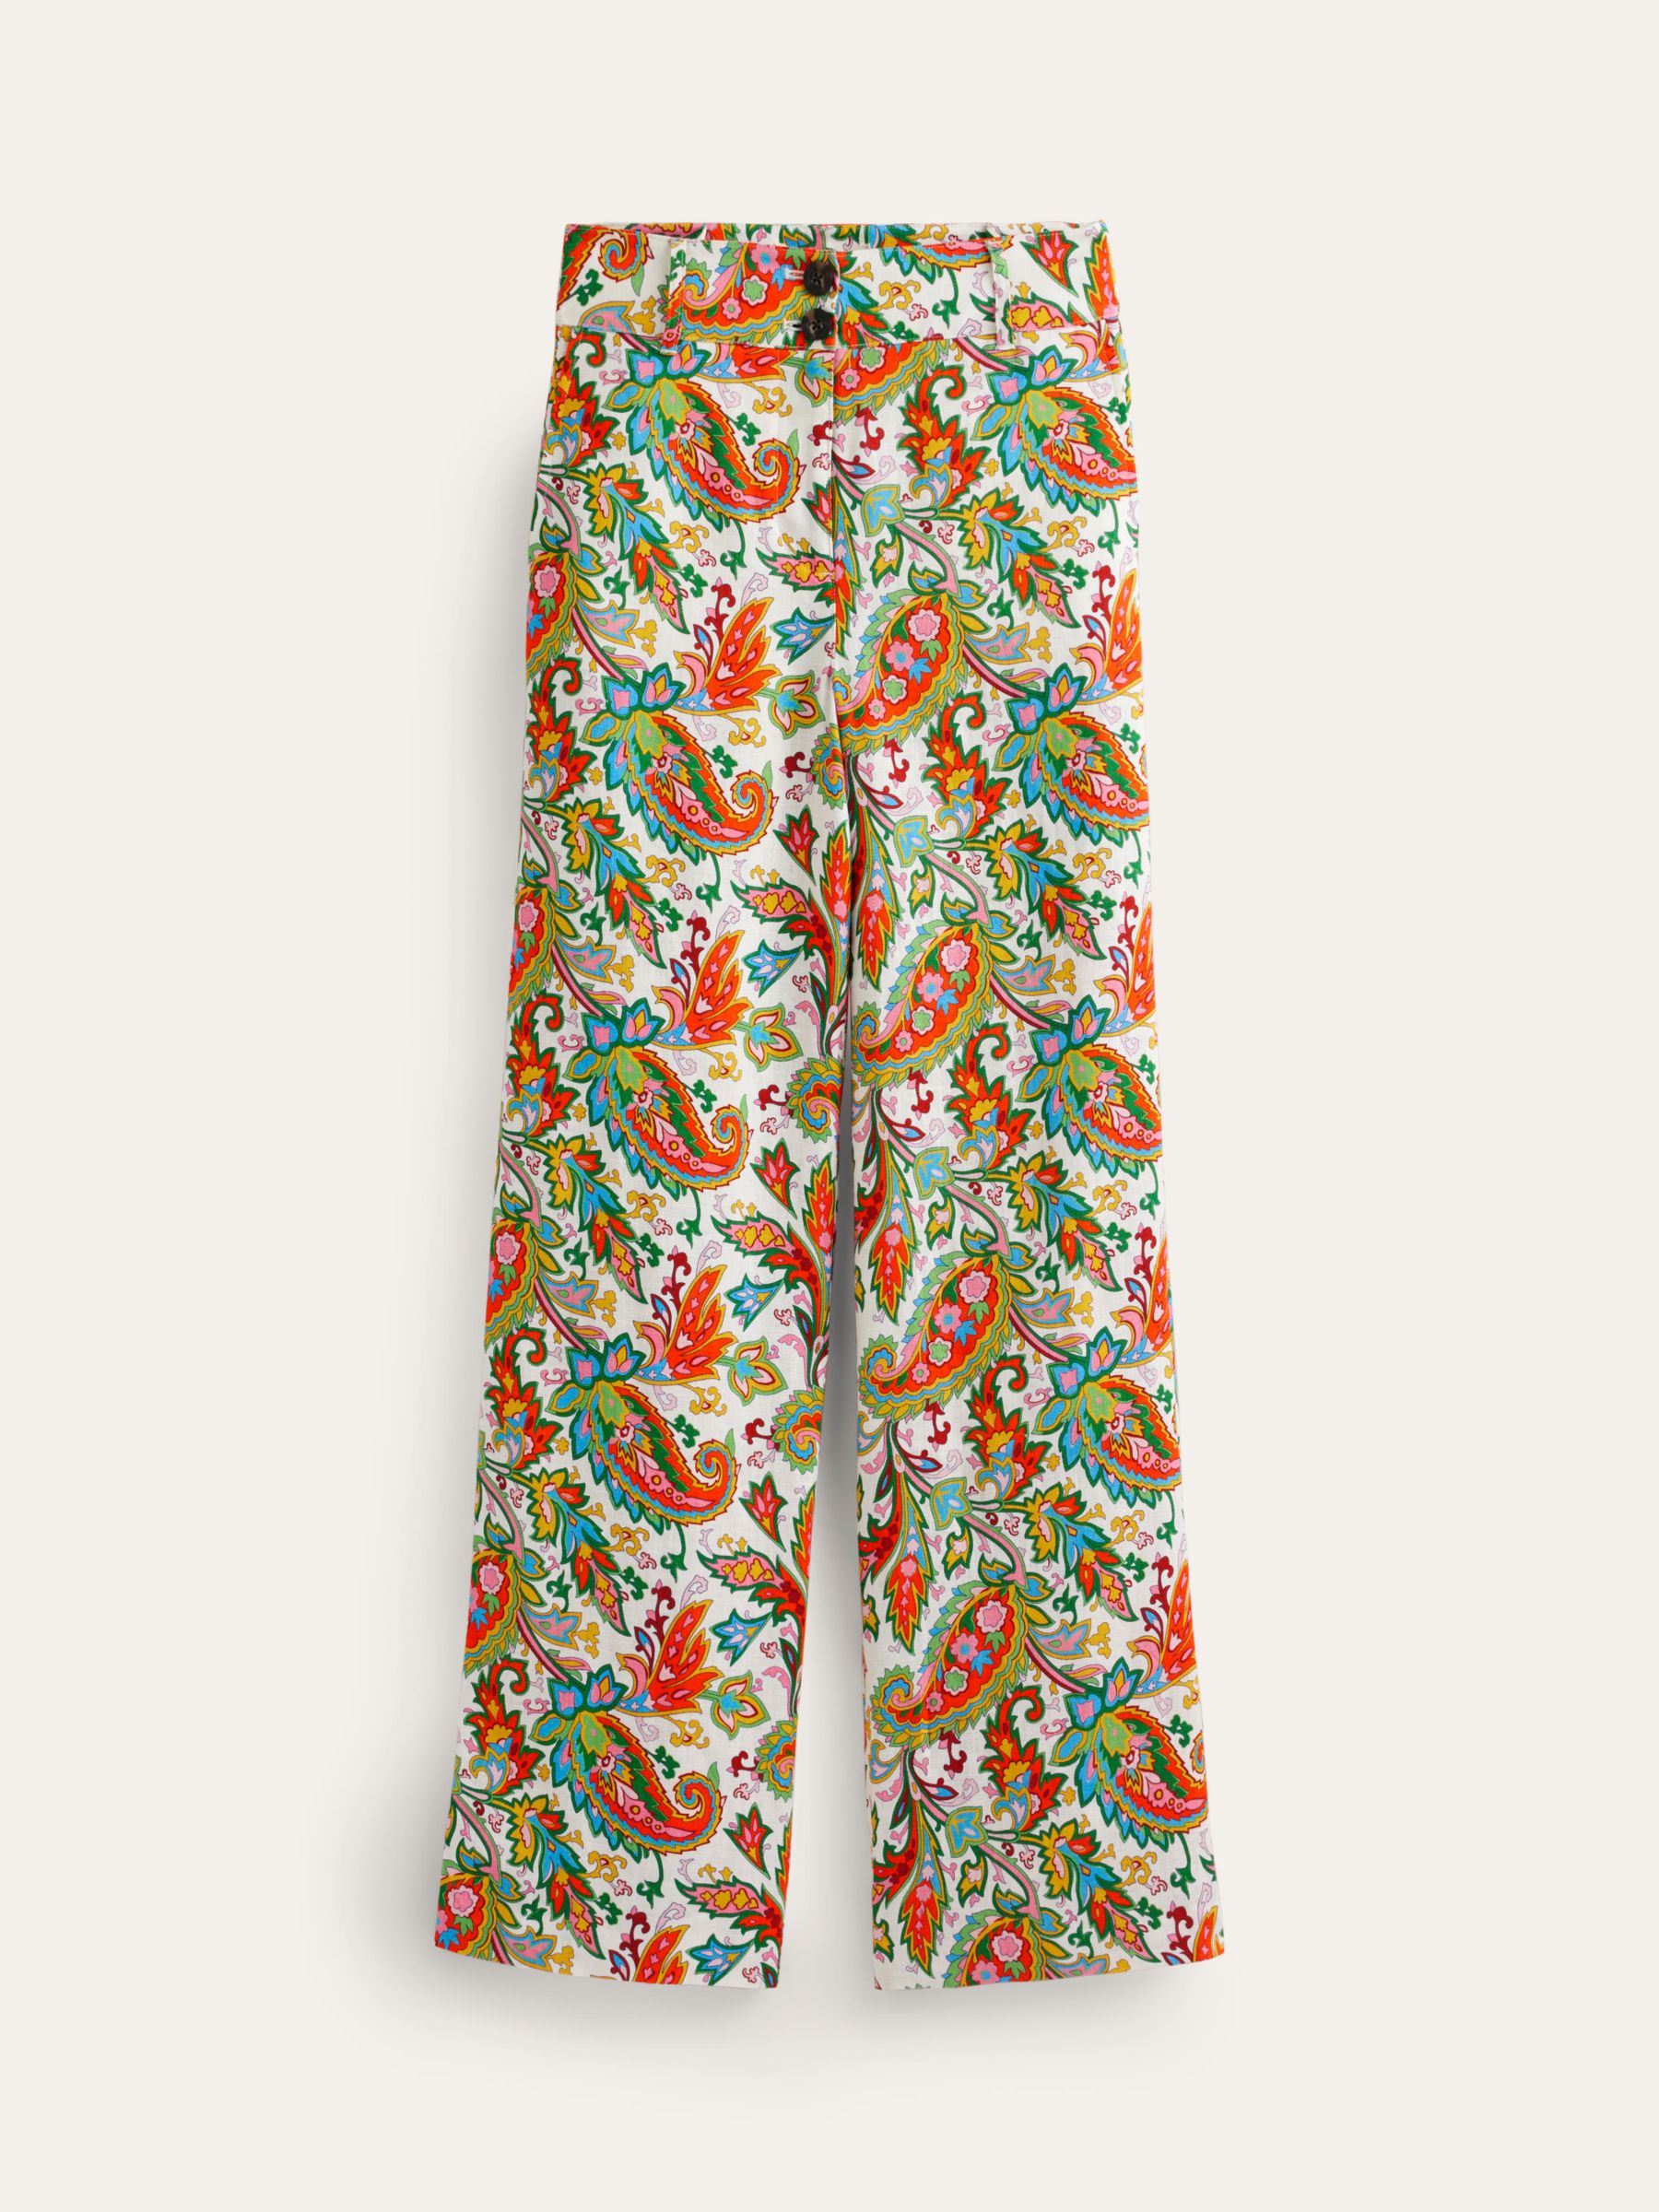 Boden Westbourne Paisley Print Linen Trousers, Ivory/Multi, 10